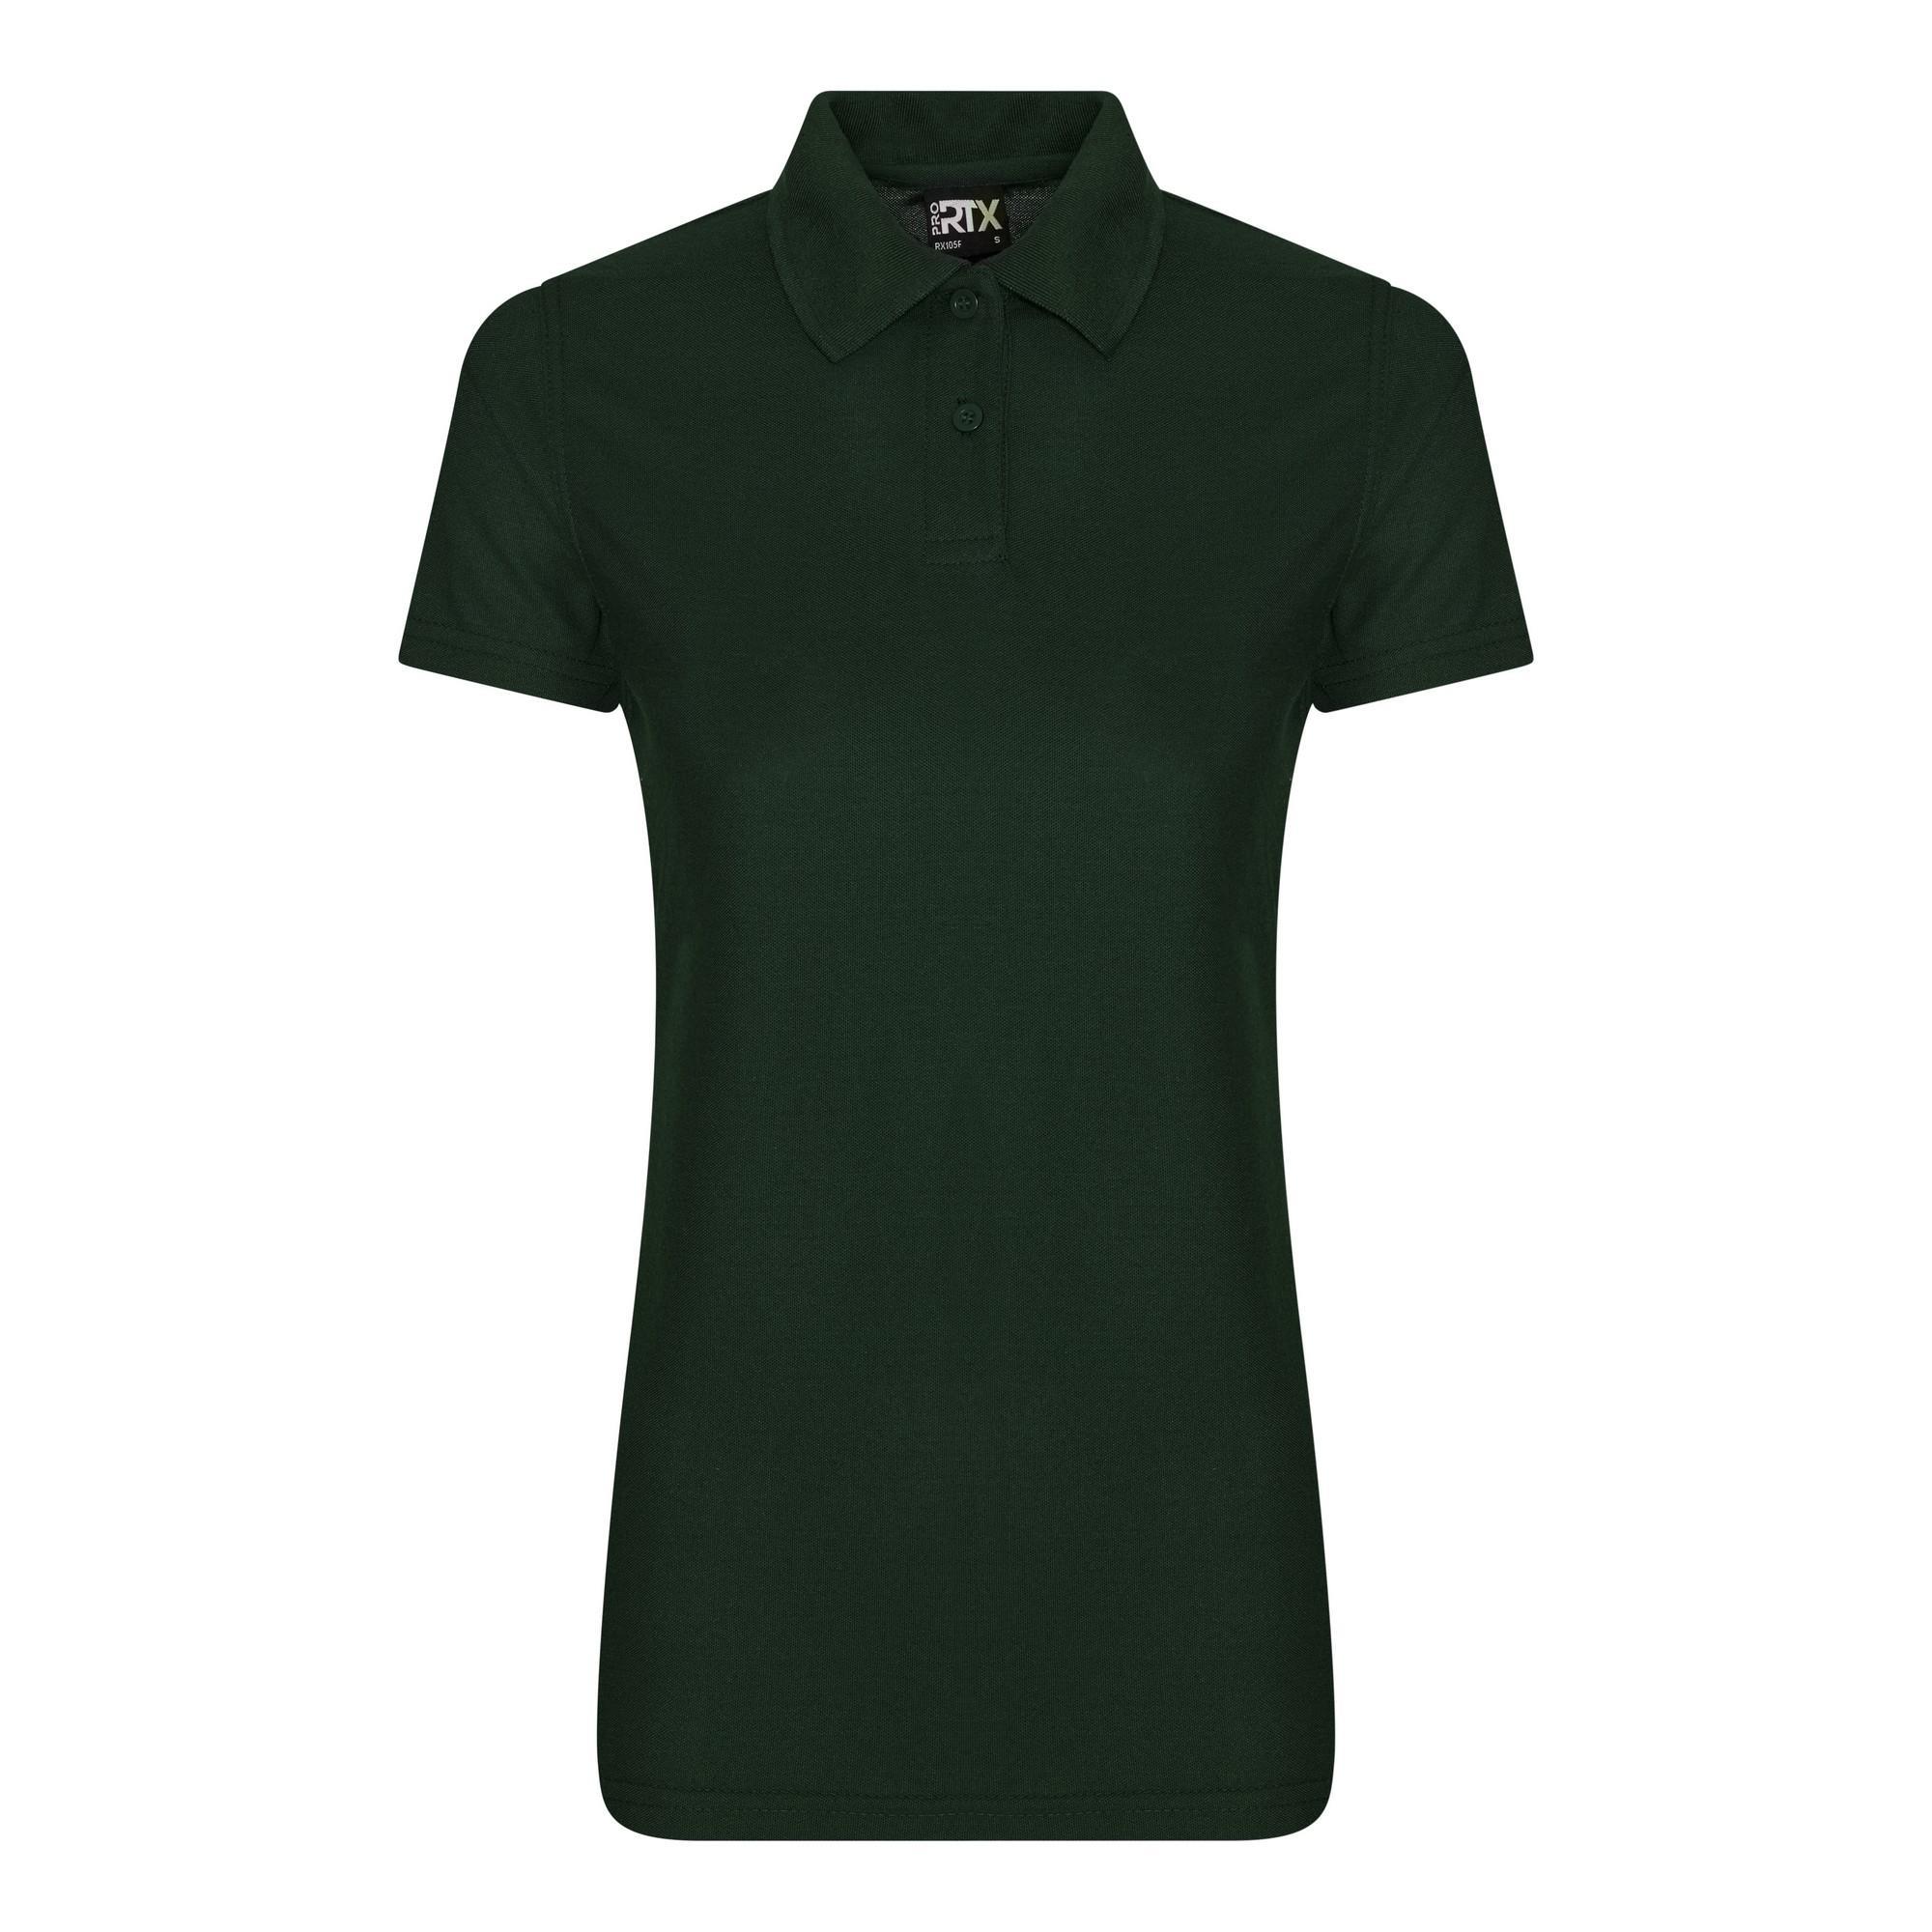 Pro RTX Womens/Ladies Pro Polyester Polo (Bottle Green) (S)